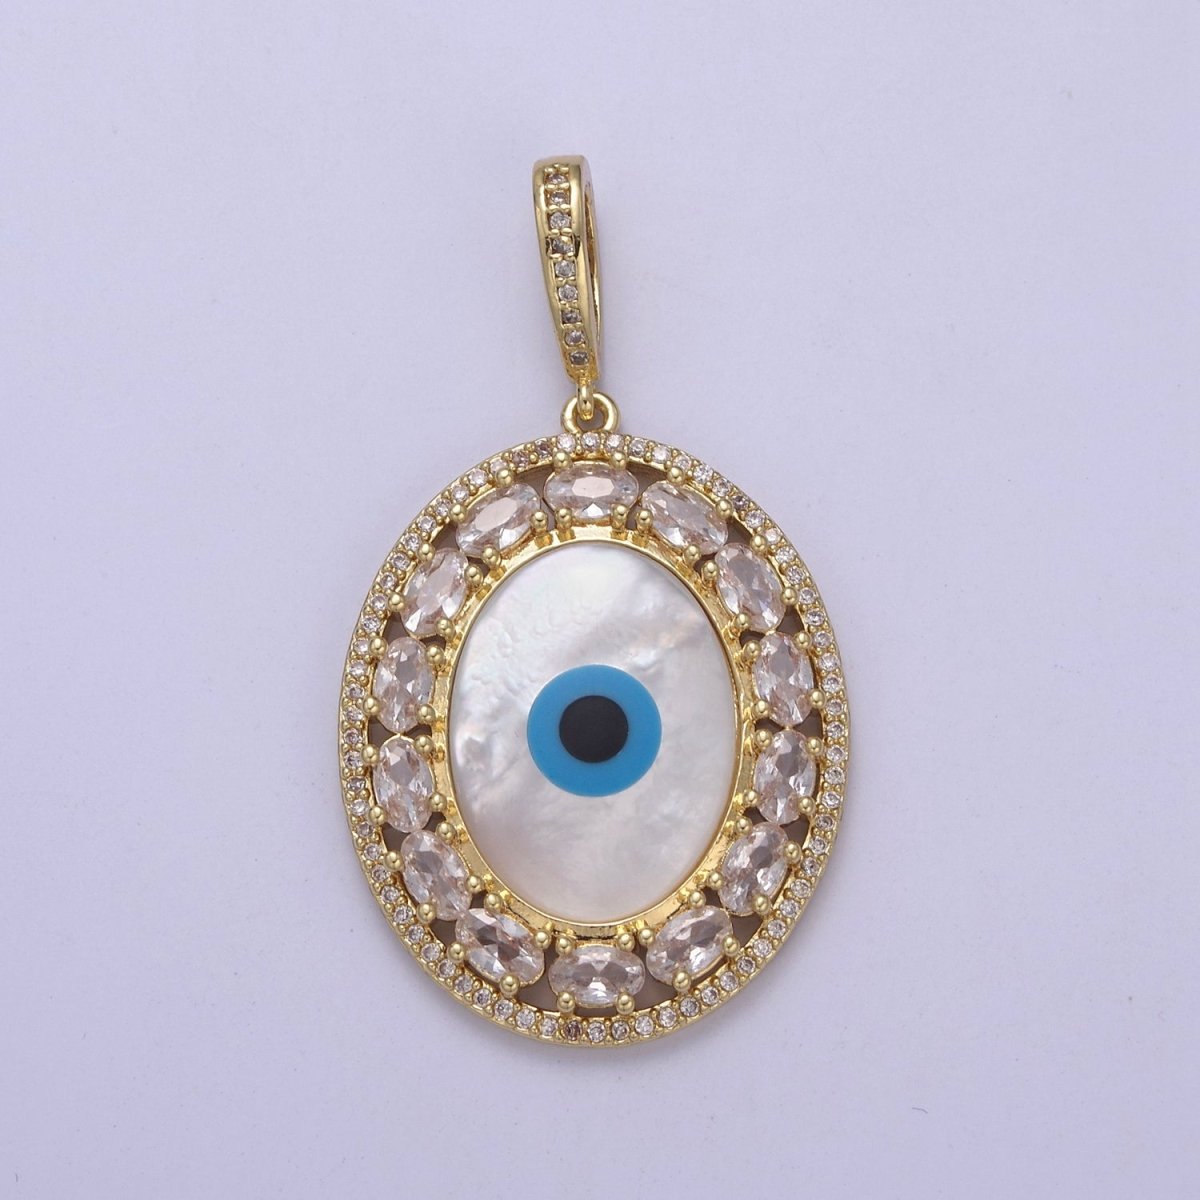 Statement Bold Oval Evil Eye Charm Gold Filled Eye Charms, Evil Eye Medallion Pendant Necklace Good Lucky Amulet Protection Bohemian Jewelry Supply H-571 - DLUXCA